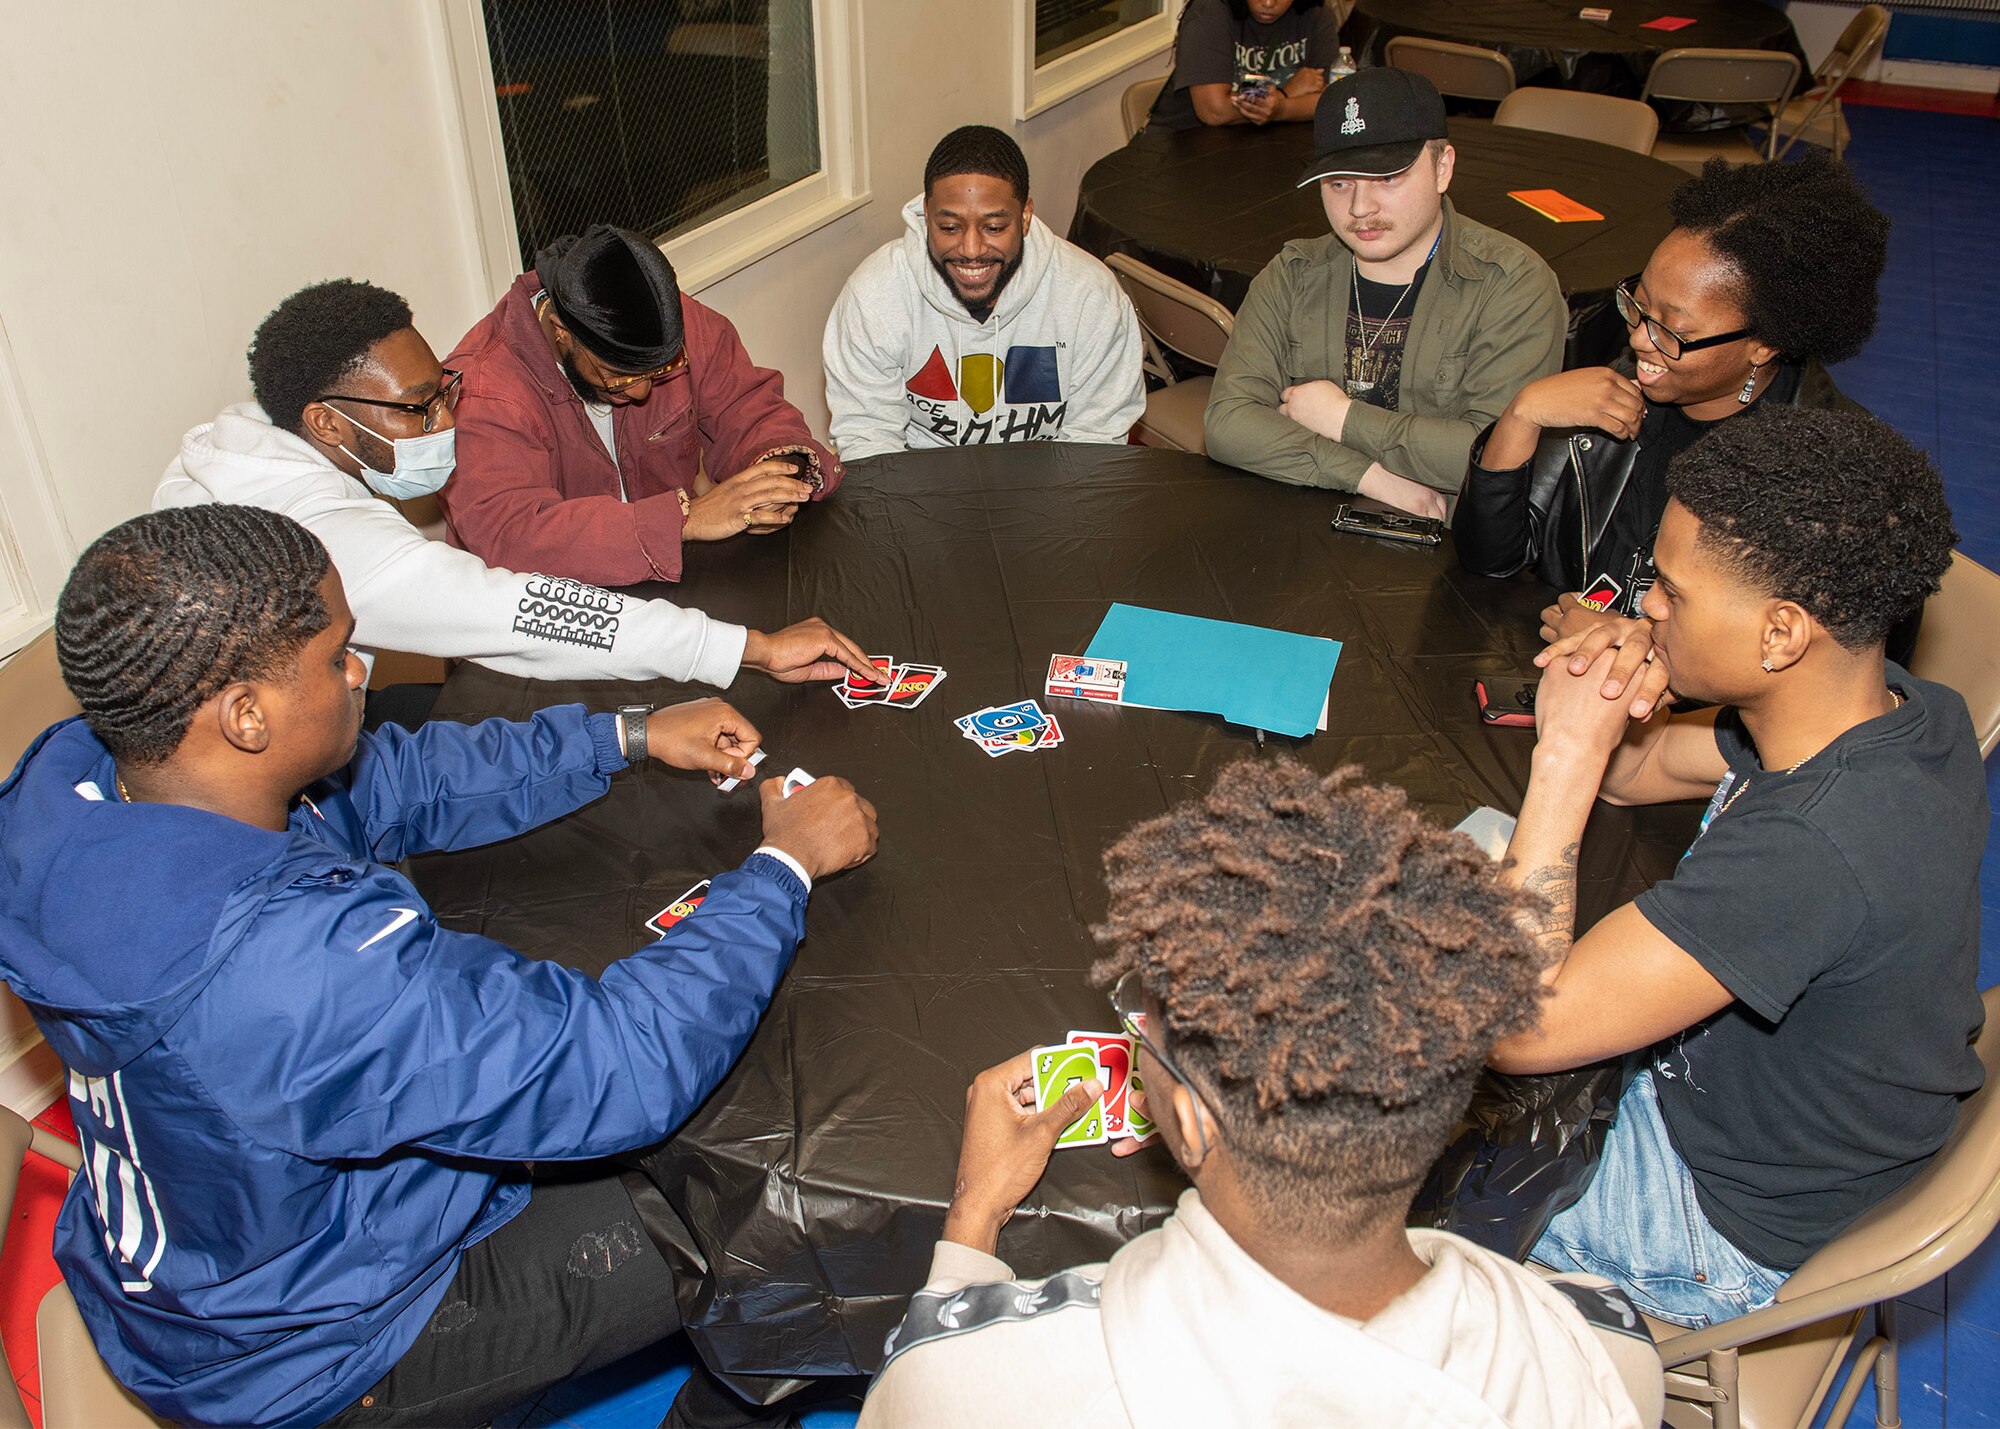 Airmen assigned to the 70th Intelligence, Surveillance and Reconnaissance Wing play a card game during a Black History Month celebration, Feb. 24, 2023, at Fort George G. Meade, Maryland. The 70th ISRW Diversity & Inclusion Council hosted the event, commemorating African Americans for their sacrifices and contributions to our country.